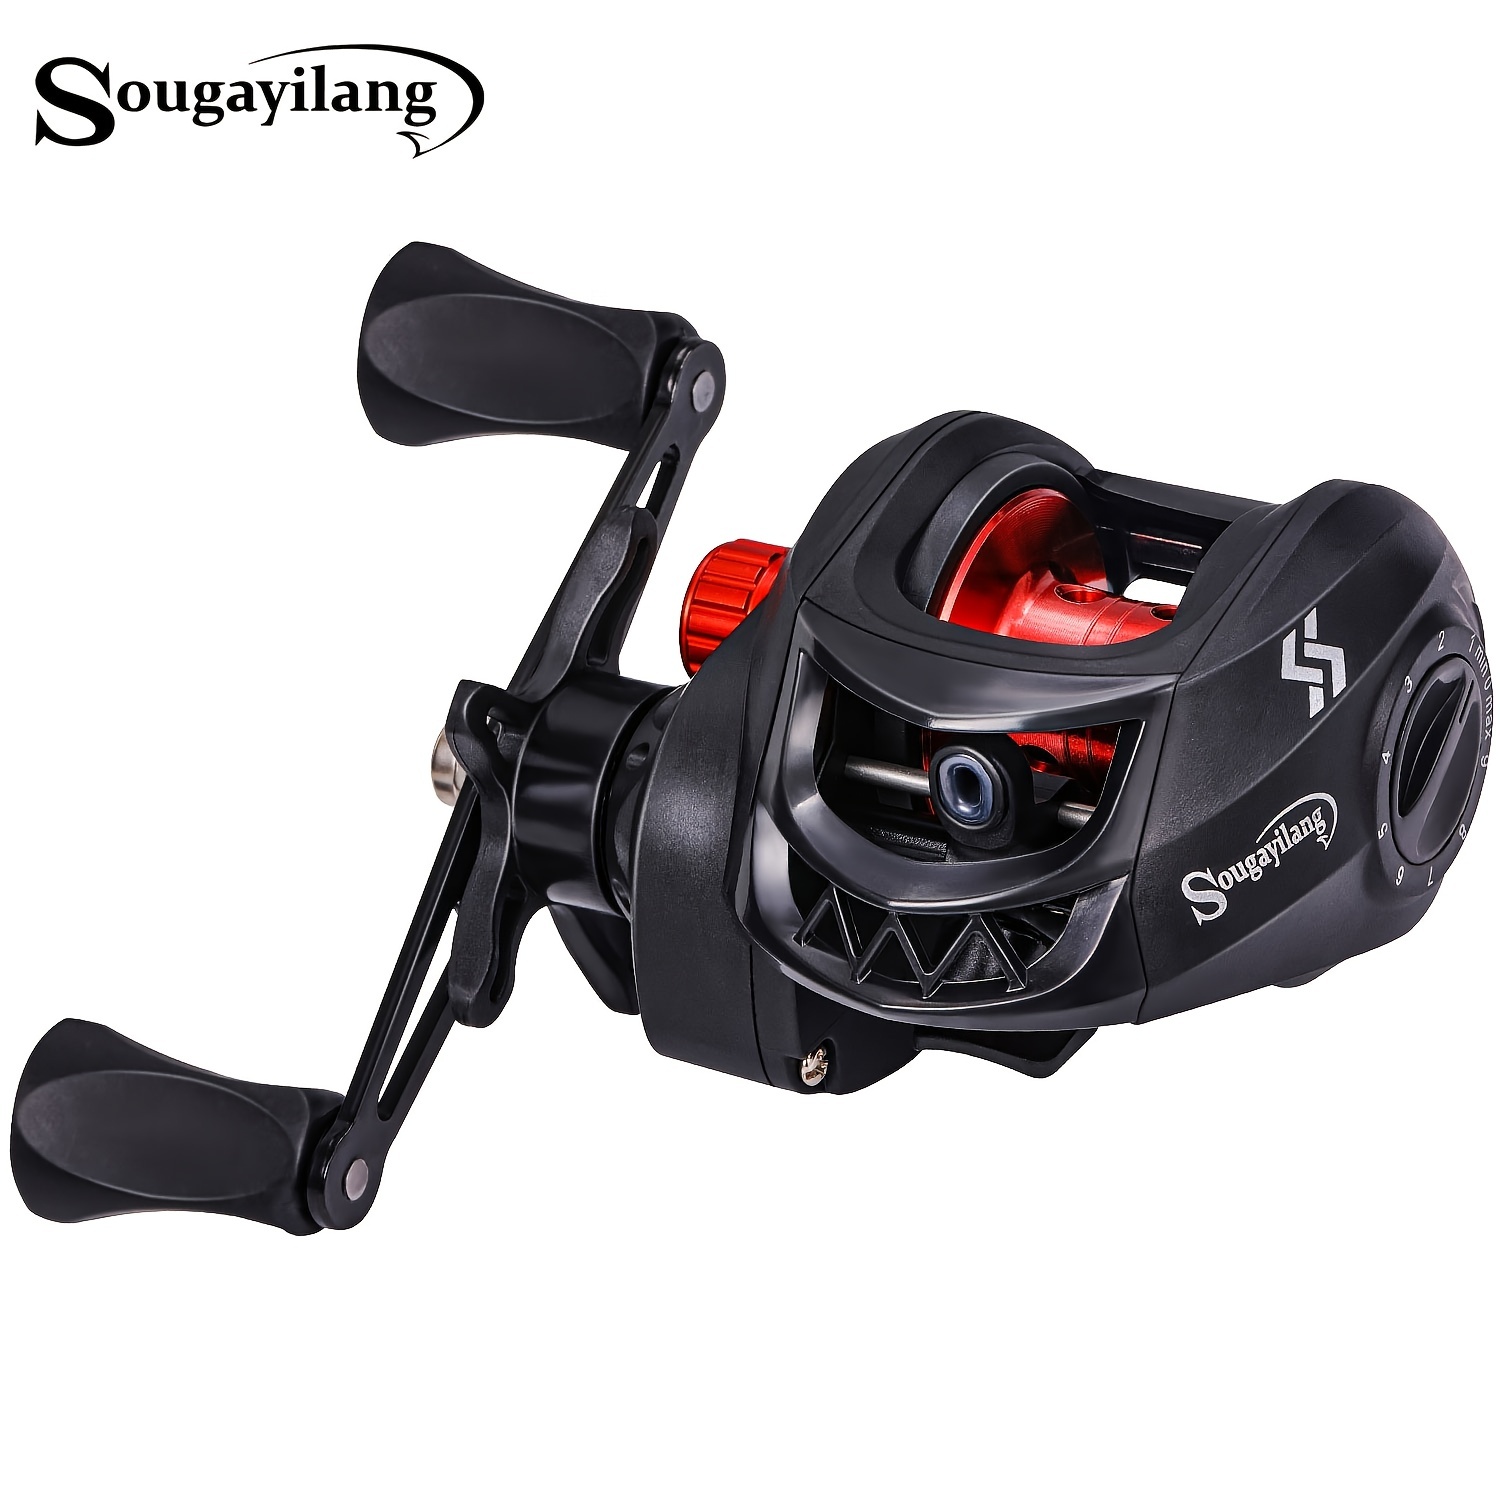 1pc Baitcasting Reel Cover For Left/Right Hand - Protect Reel From Damage  And Corrosion